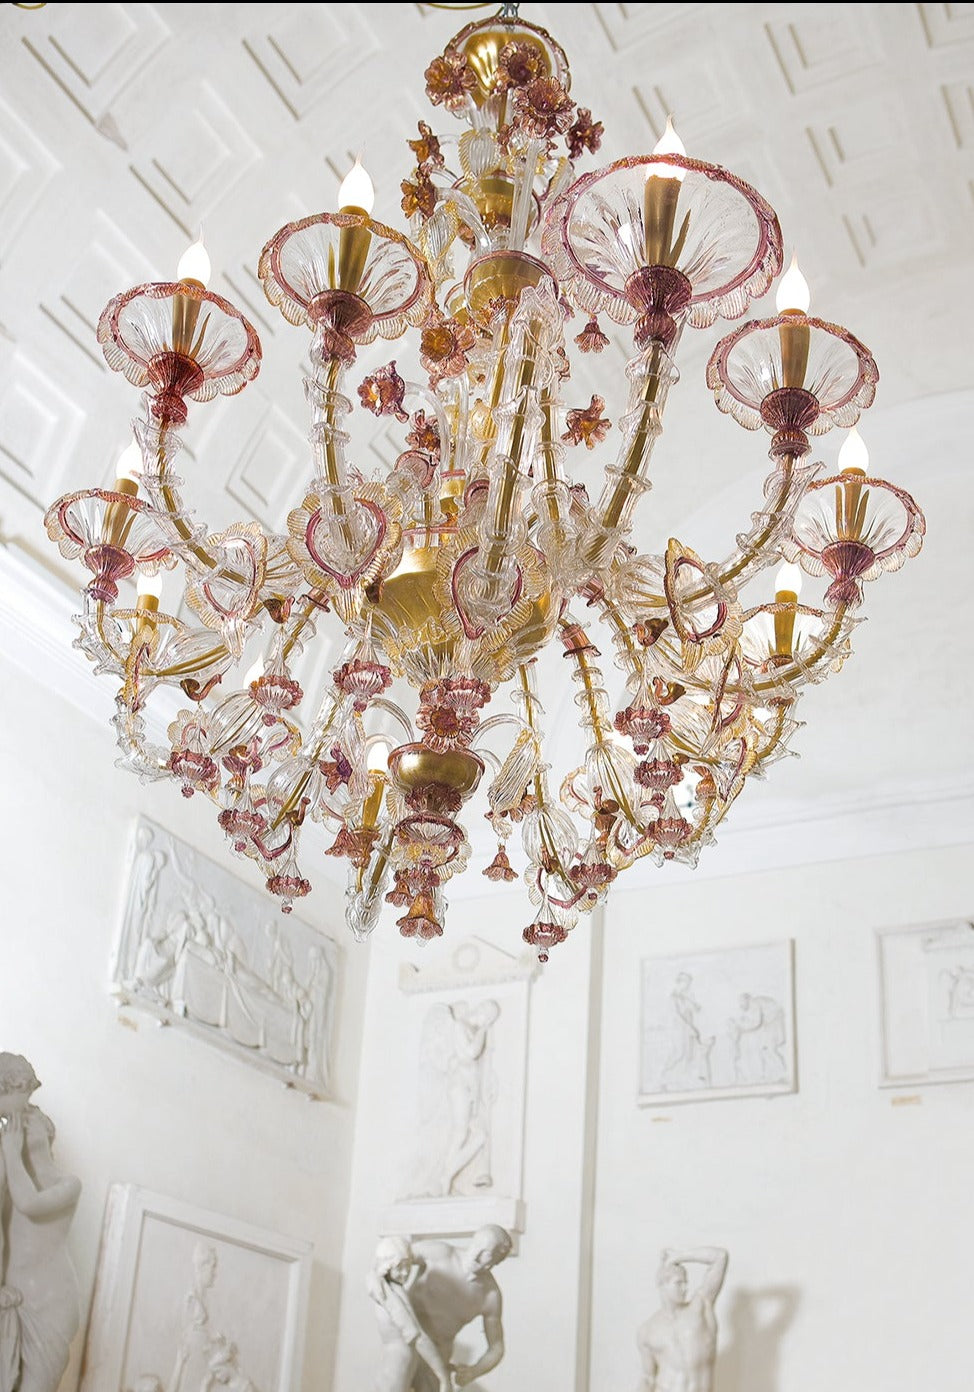 Handcrafted Ornamental Antique Fine Italian Chandelier With Twelve Lights And Murano Glass